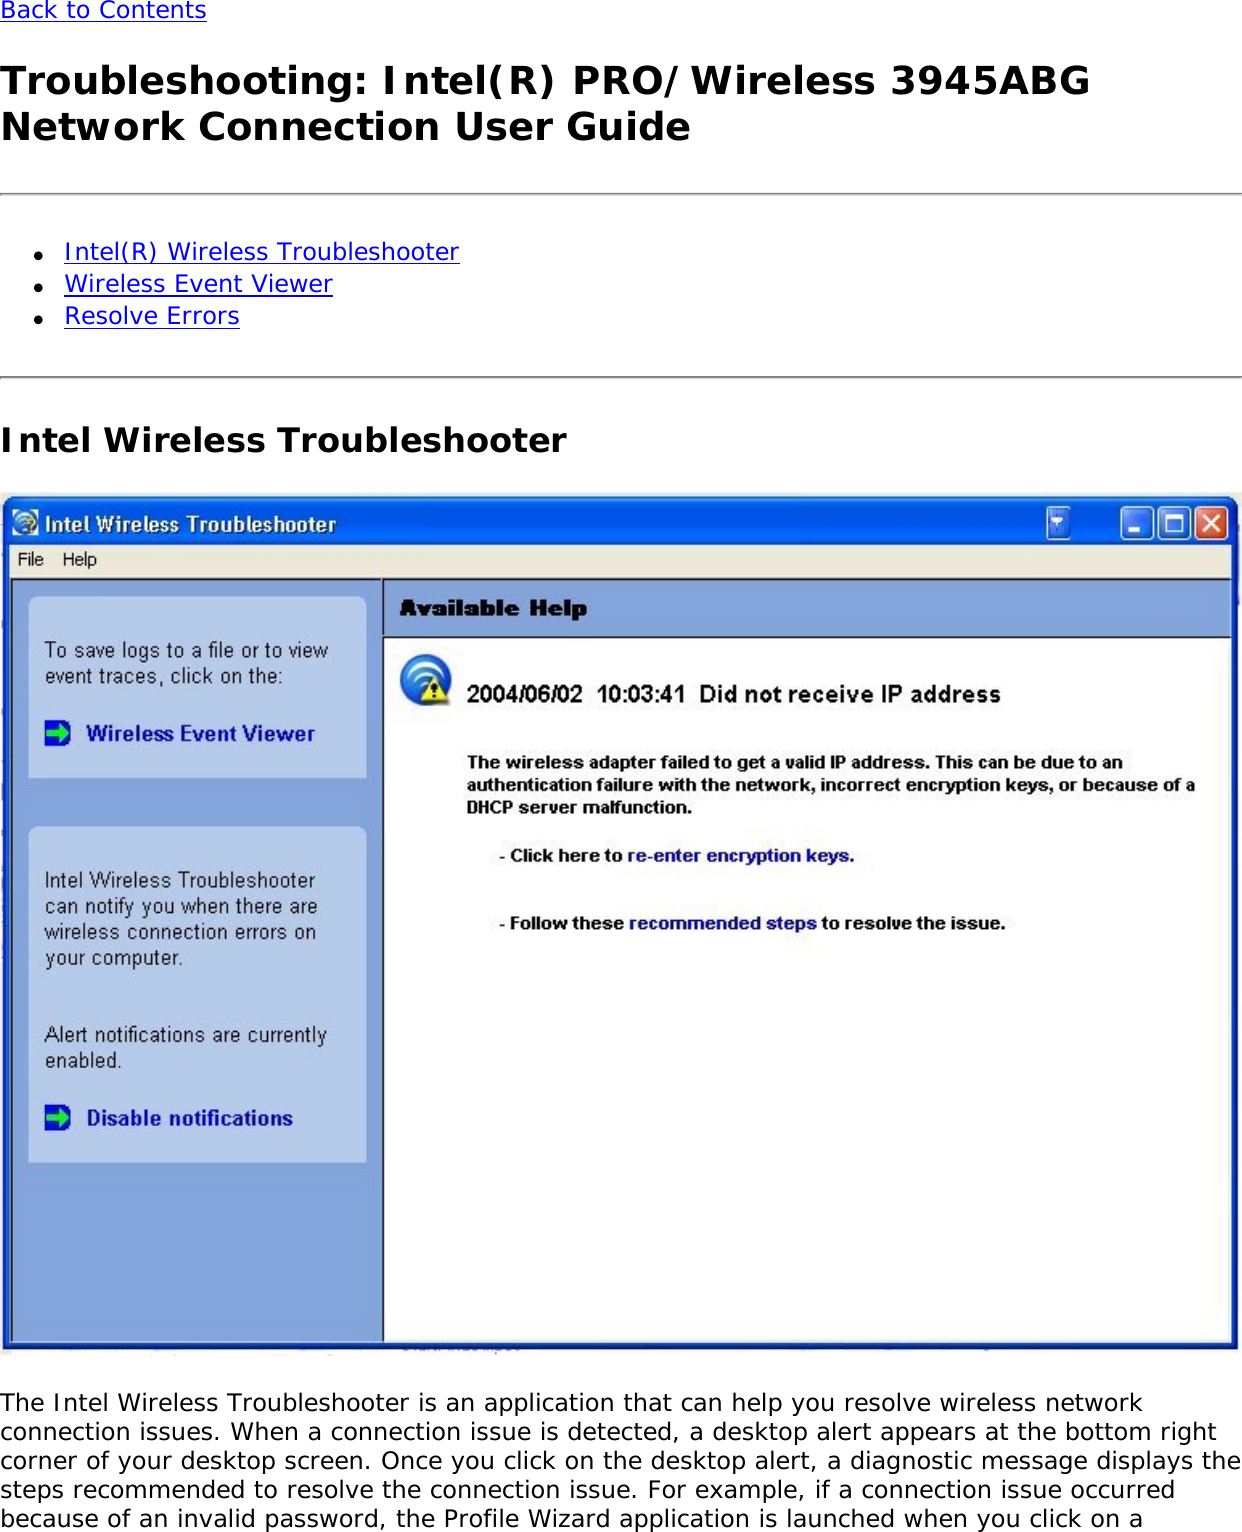 Back to Contents Troubleshooting: Intel(R) PRO/Wireless 3945ABG Network Connection User Guide●     Intel(R) Wireless Troubleshooter●     Wireless Event Viewer●     Resolve ErrorsIntel Wireless Troubleshooter  The Intel Wireless Troubleshooter is an application that can help you resolve wireless network connection issues. When a connection issue is detected, a desktop alert appears at the bottom right corner of your desktop screen. Once you click on the desktop alert, a diagnostic message displays the steps recommended to resolve the connection issue. For example, if a connection issue occurred because of an invalid password, the Profile Wizard application is launched when you click on a 